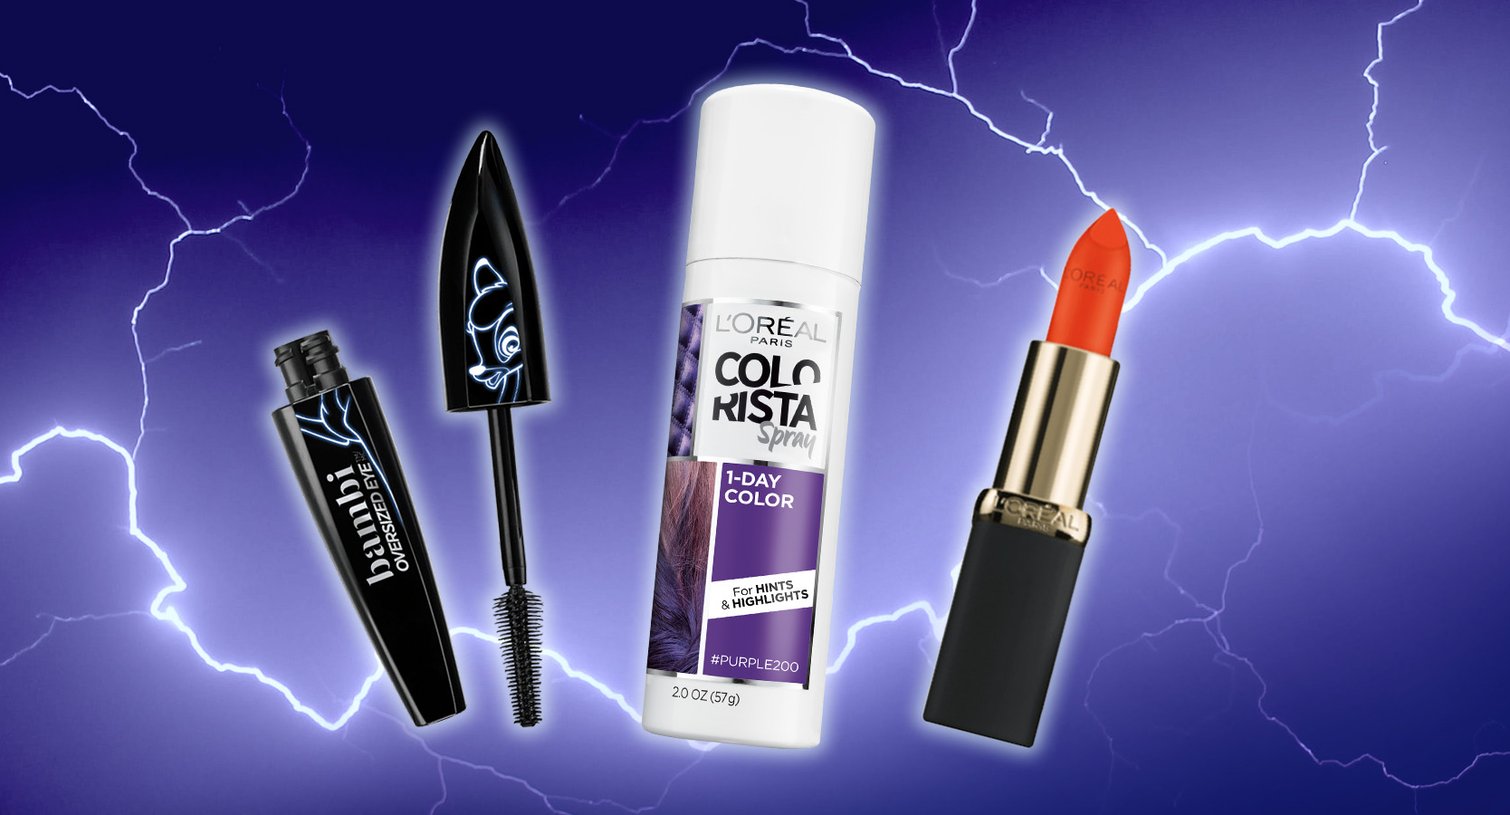 Longwear L Oreal Paris Makeup Products To Use On Halloween Thumbnail Bmag